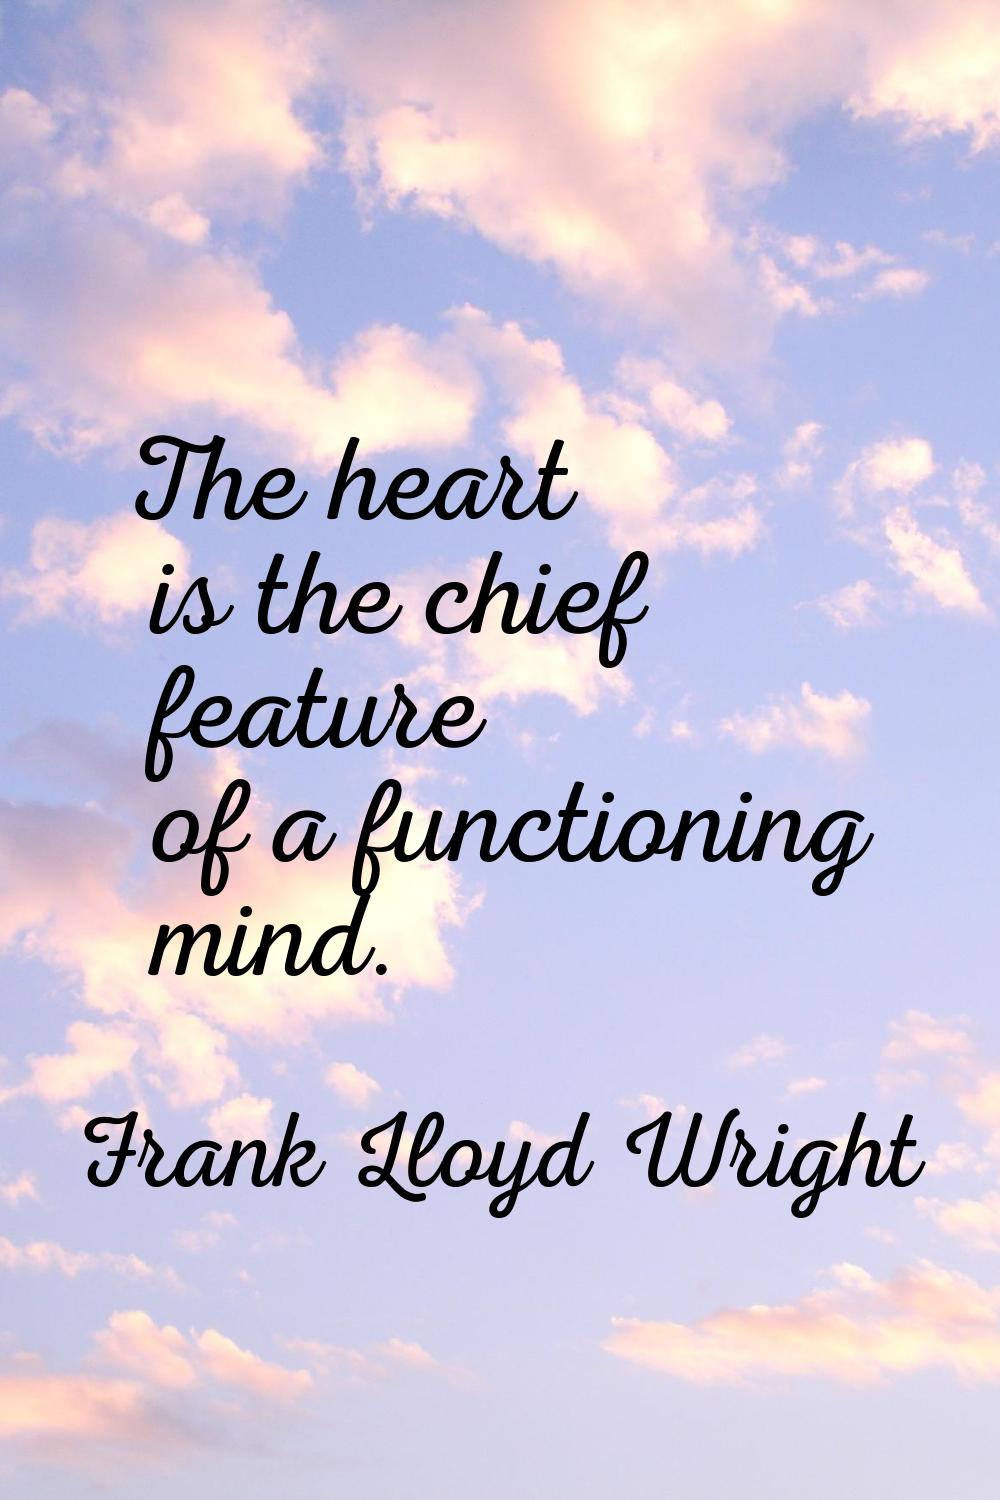 The heart is the chief feature of a functioning mind.